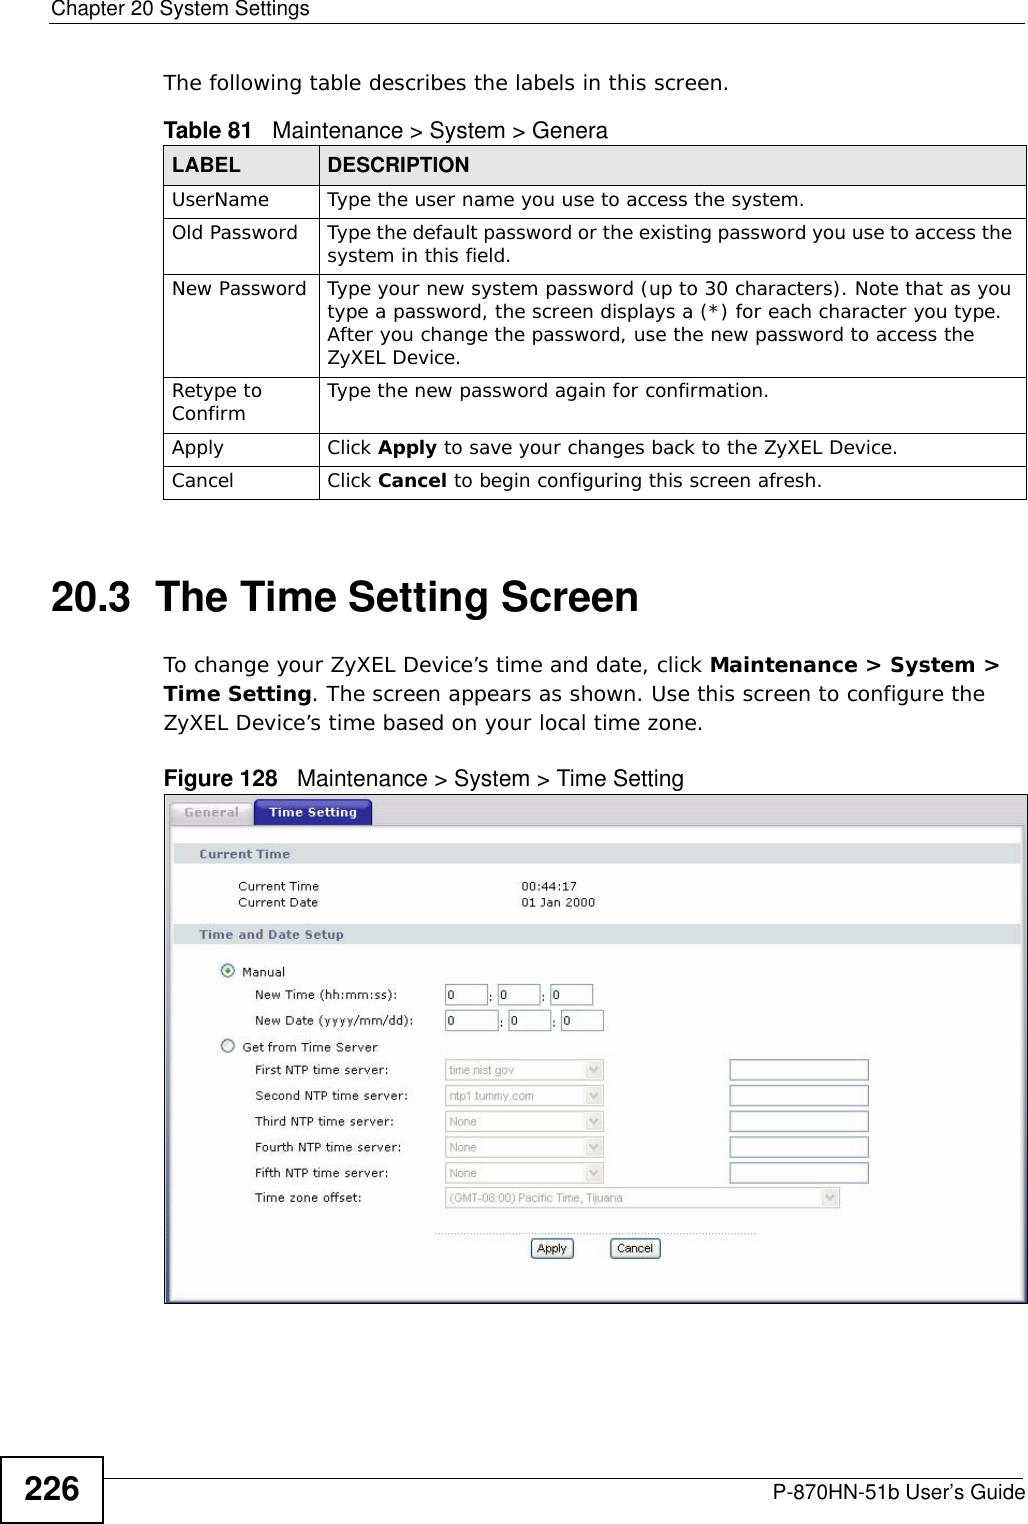 Chapter 20 System SettingsP-870HN-51b User’s Guide226The following table describes the labels in this screen. 20.3  The Time Setting Screen To change your ZyXEL Device’s time and date, click Maintenance &gt; System &gt; Time Setting. The screen appears as shown. Use this screen to configure the ZyXEL Device’s time based on your local time zone. Figure 128   Maintenance &gt; System &gt; Time SettingTable 81   Maintenance &gt; System &gt; GeneraLABEL DESCRIPTIONUserName Type the user name you use to access the system.Old Password Type the default password or the existing password you use to access the system in this field.New Password Type your new system password (up to 30 characters). Note that as you type a password, the screen displays a (*) for each character you type. After you change the password, use the new password to access the ZyXEL Device.Retype to Confirm Type the new password again for confirmation.Apply Click Apply to save your changes back to the ZyXEL Device.Cancel Click Cancel to begin configuring this screen afresh.